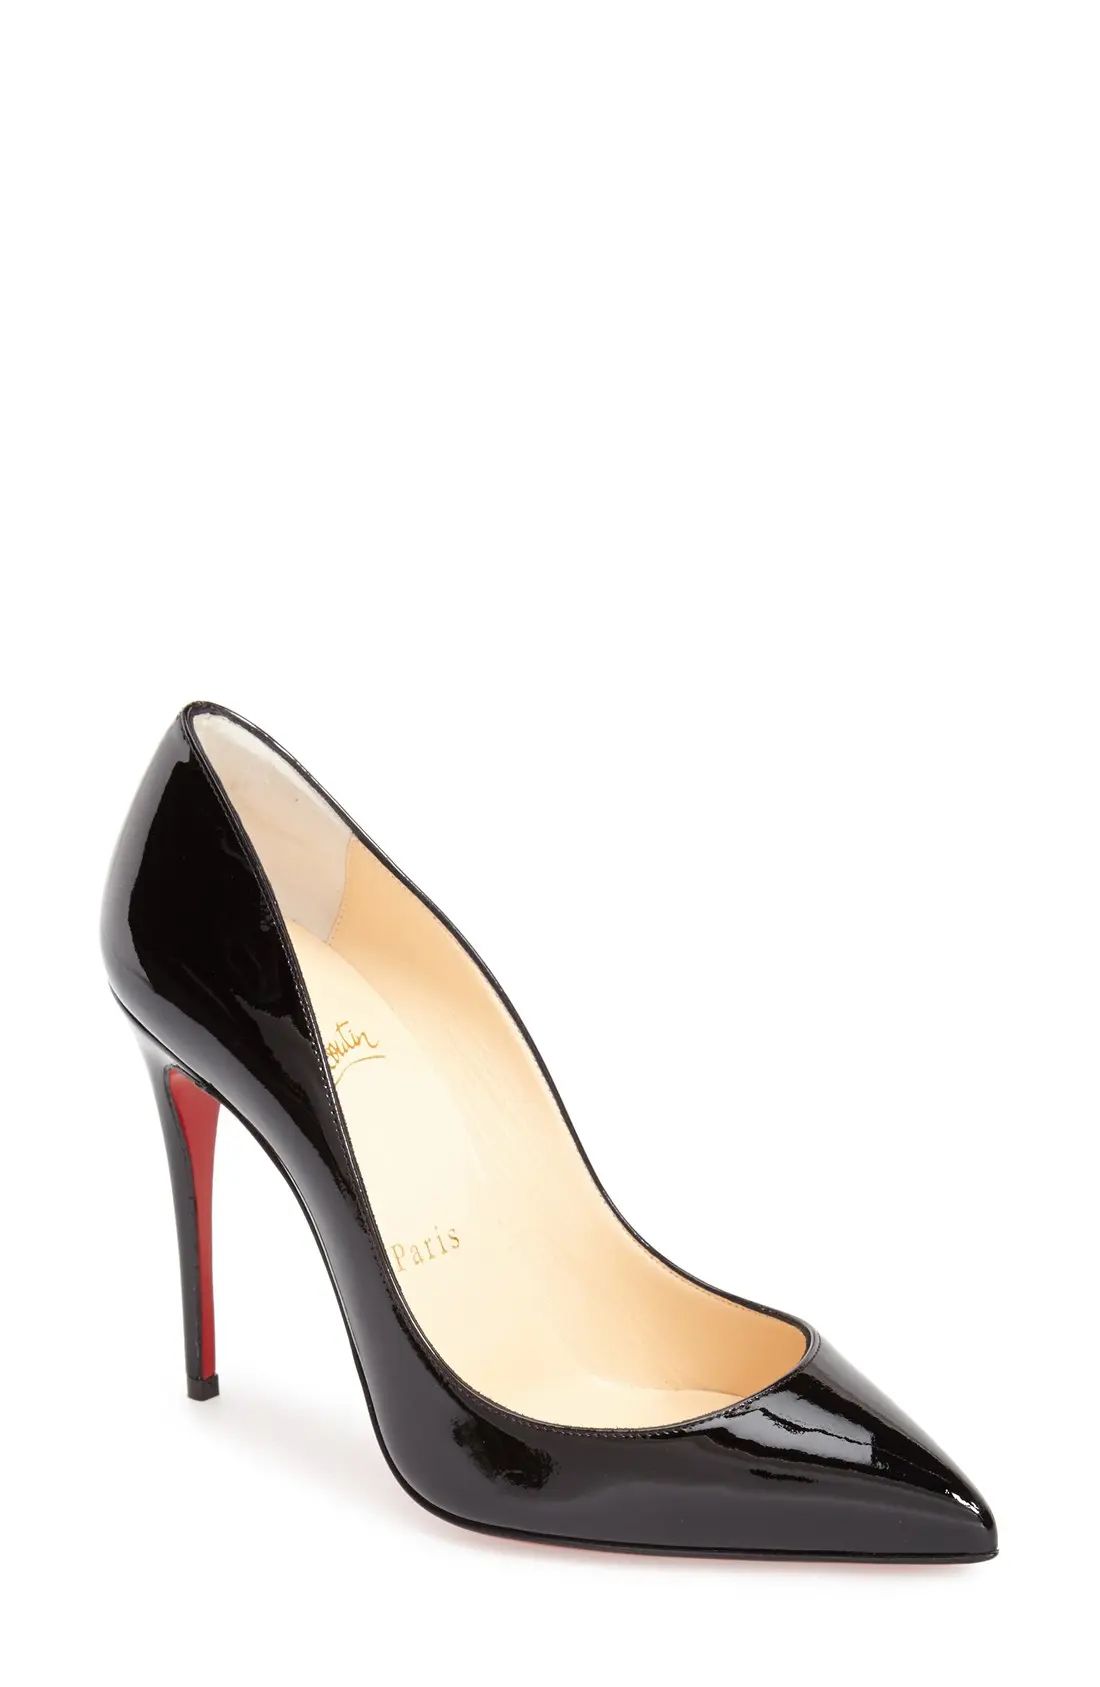 Christian Louboutin Pigalle Follies Pointed Toe Pump in Black Patent at Nordstrom, Size 5.5Us | Nordstrom